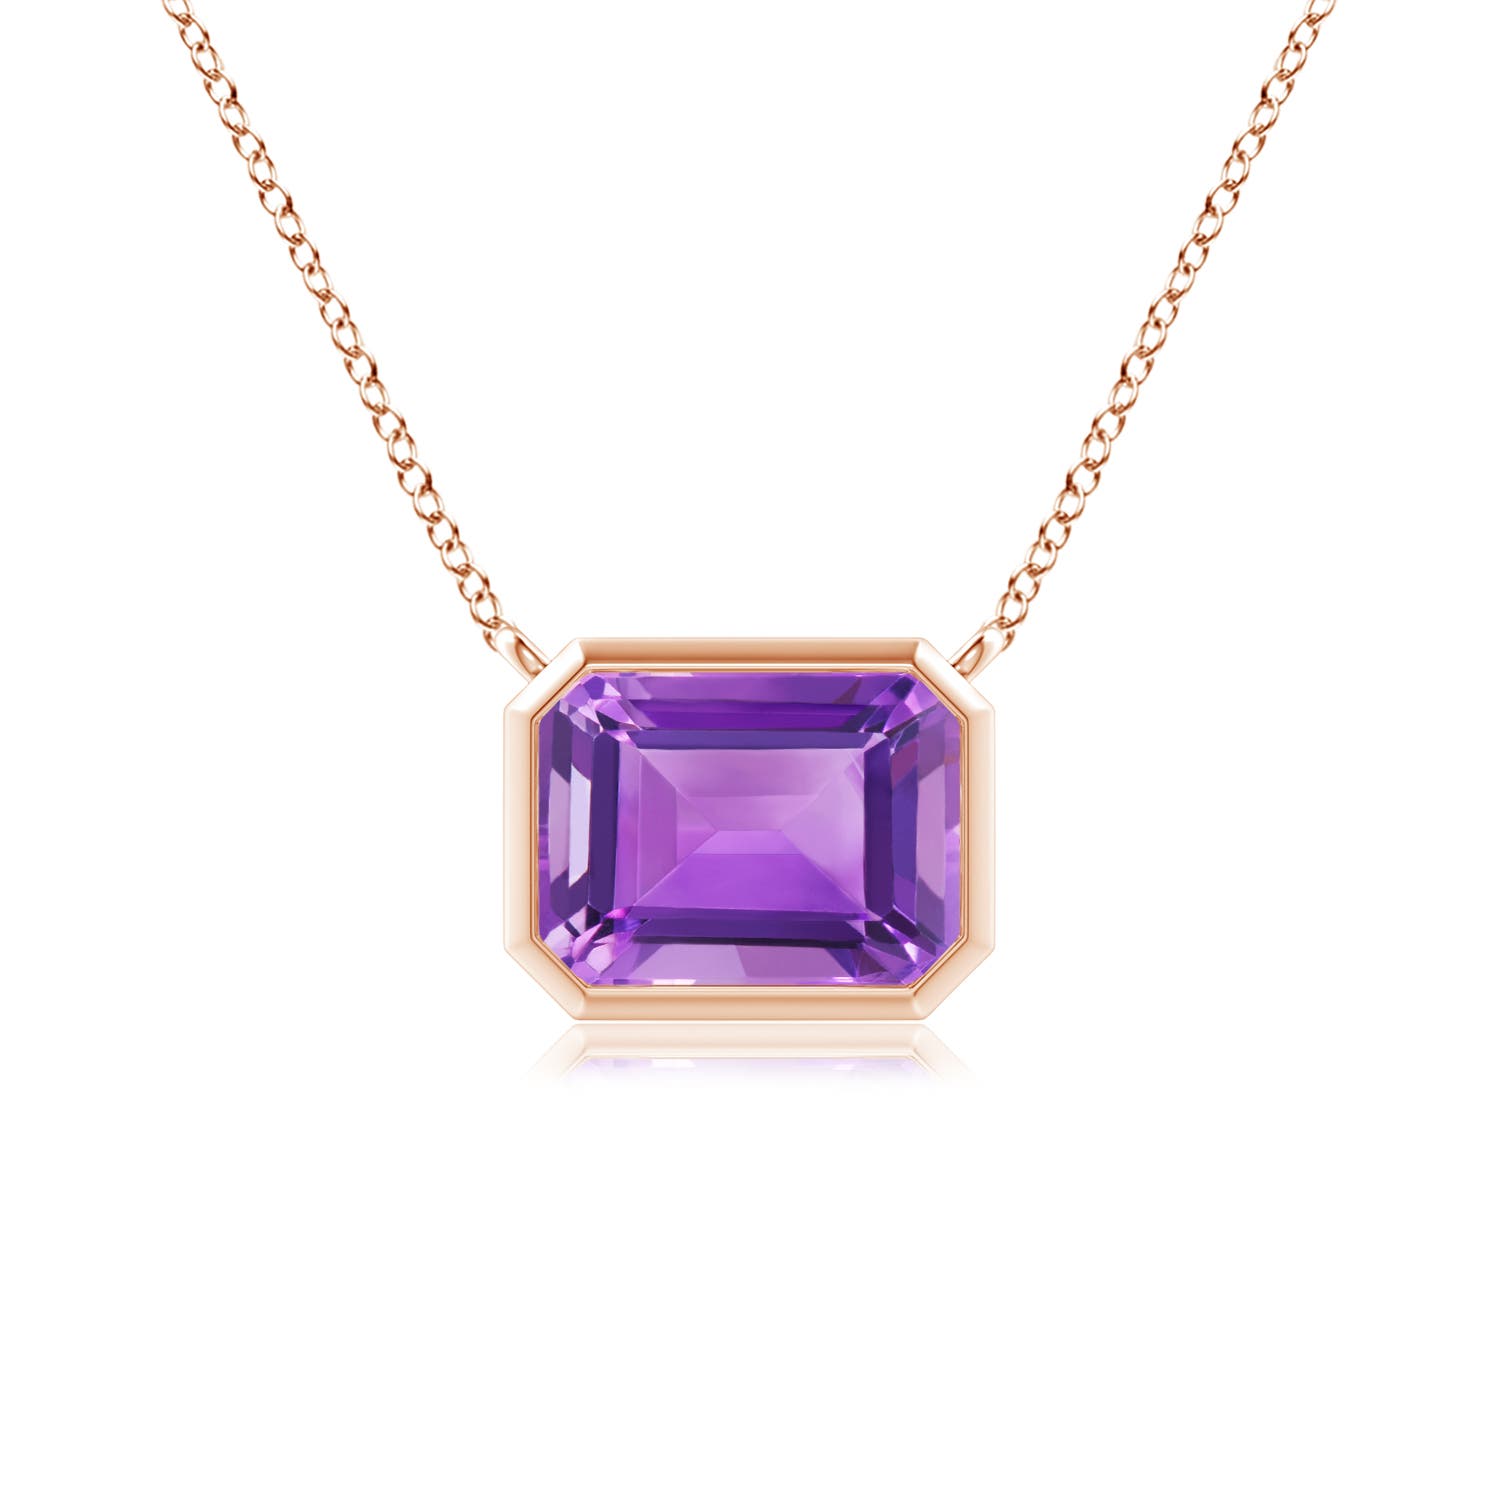 AA - Amethyst / 1.5 CT / 14 KT Rose Gold